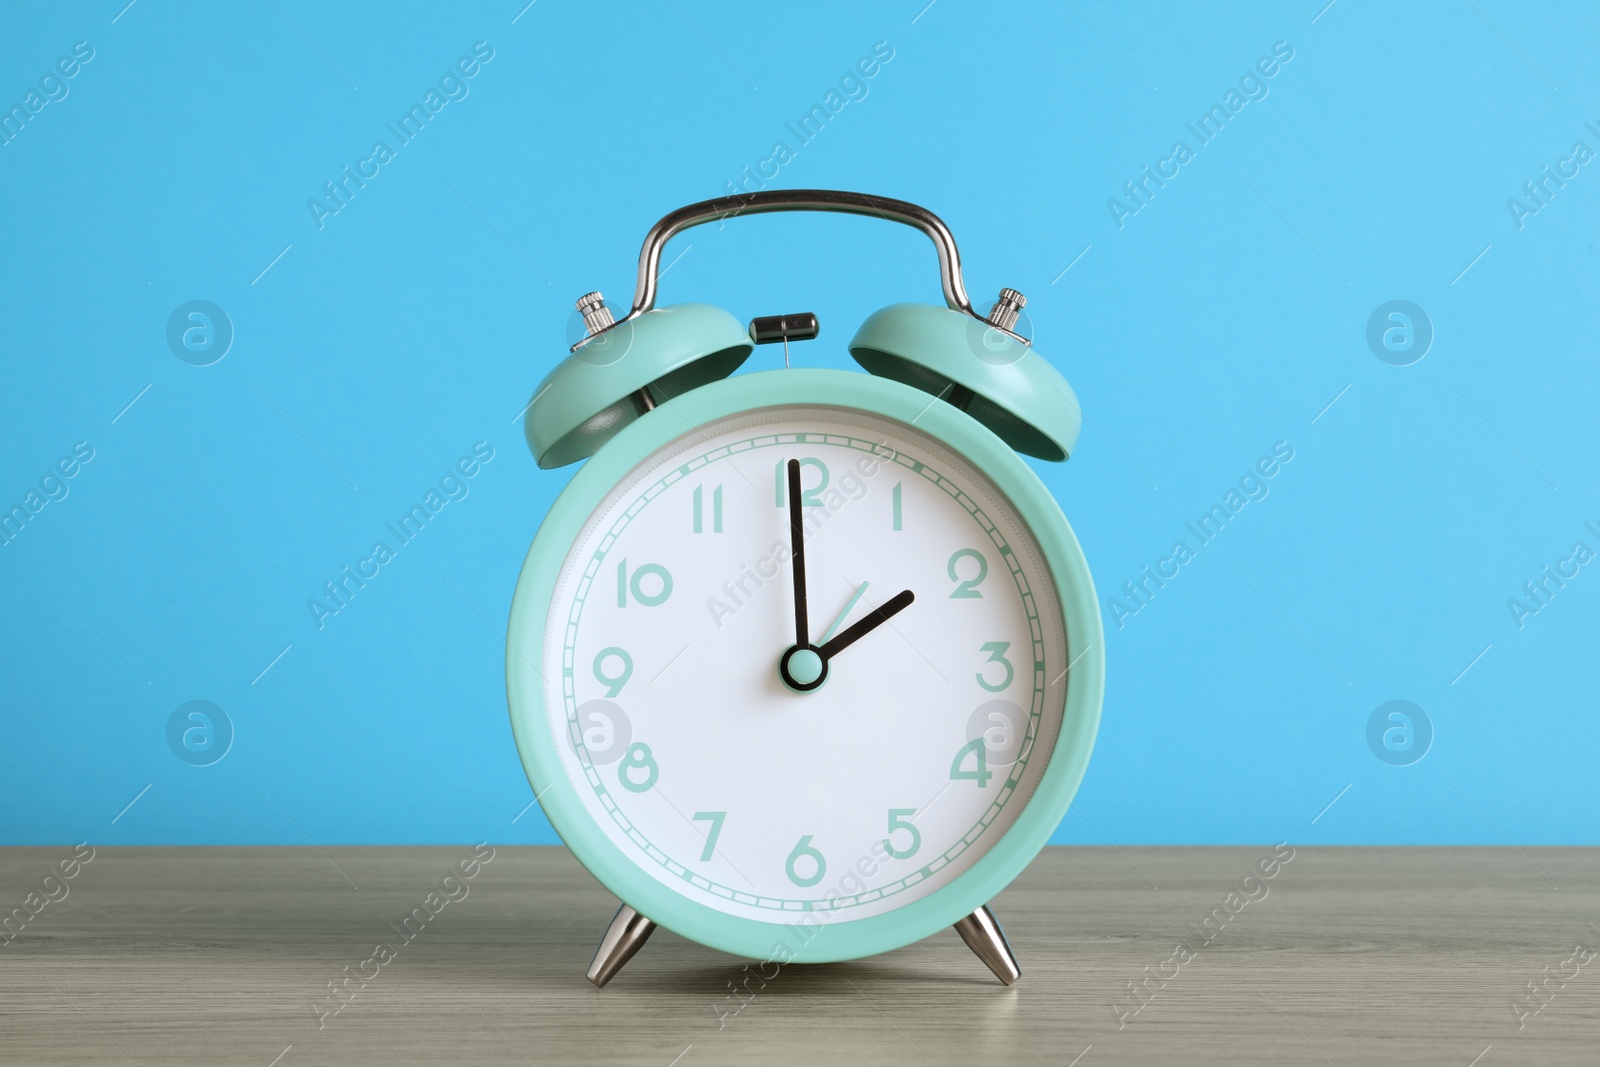 Photo of Turquoise alarm clock on wooden table against light blue background